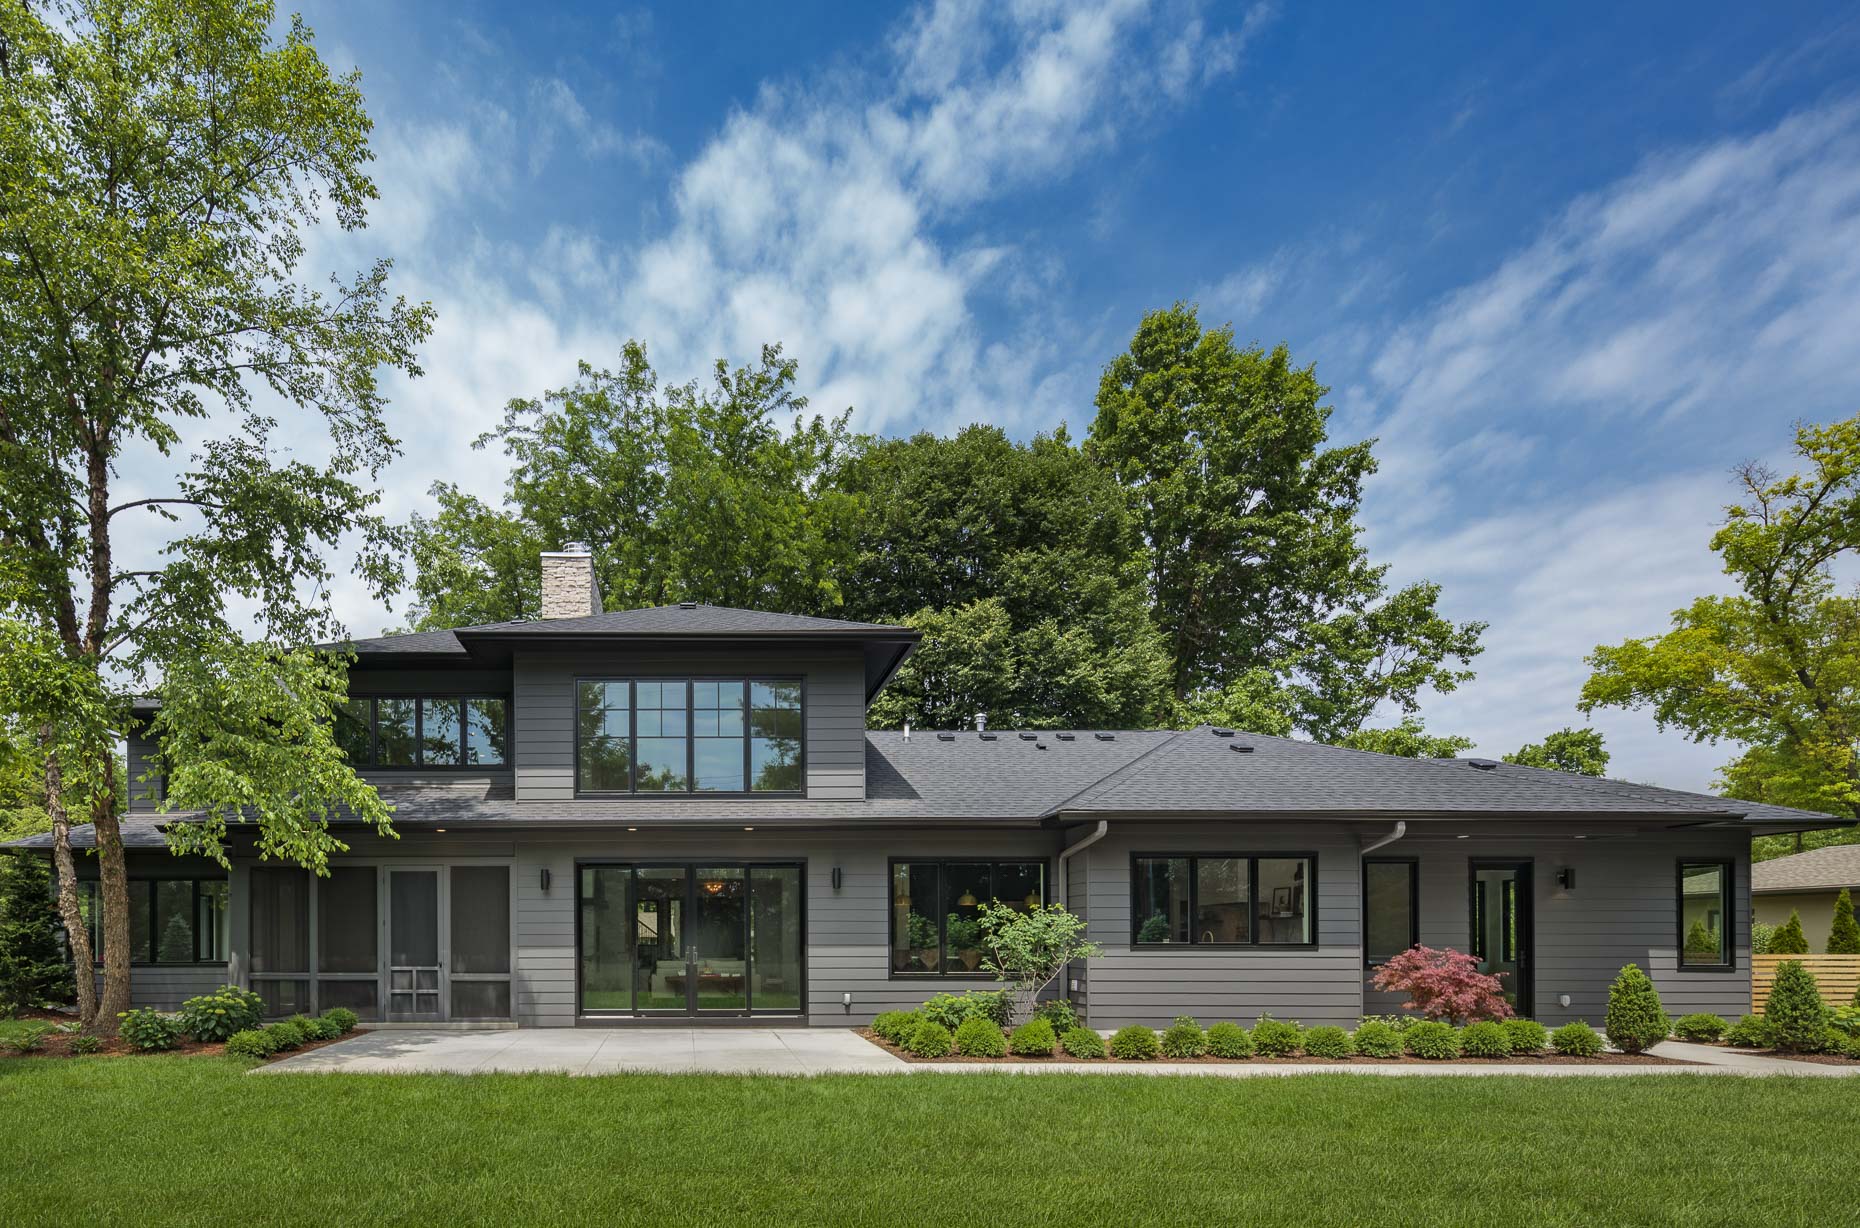 Dorchester Private Residence by Paul & Jo Studio photographed by Lauren K Davis based in Columbus, Ohio